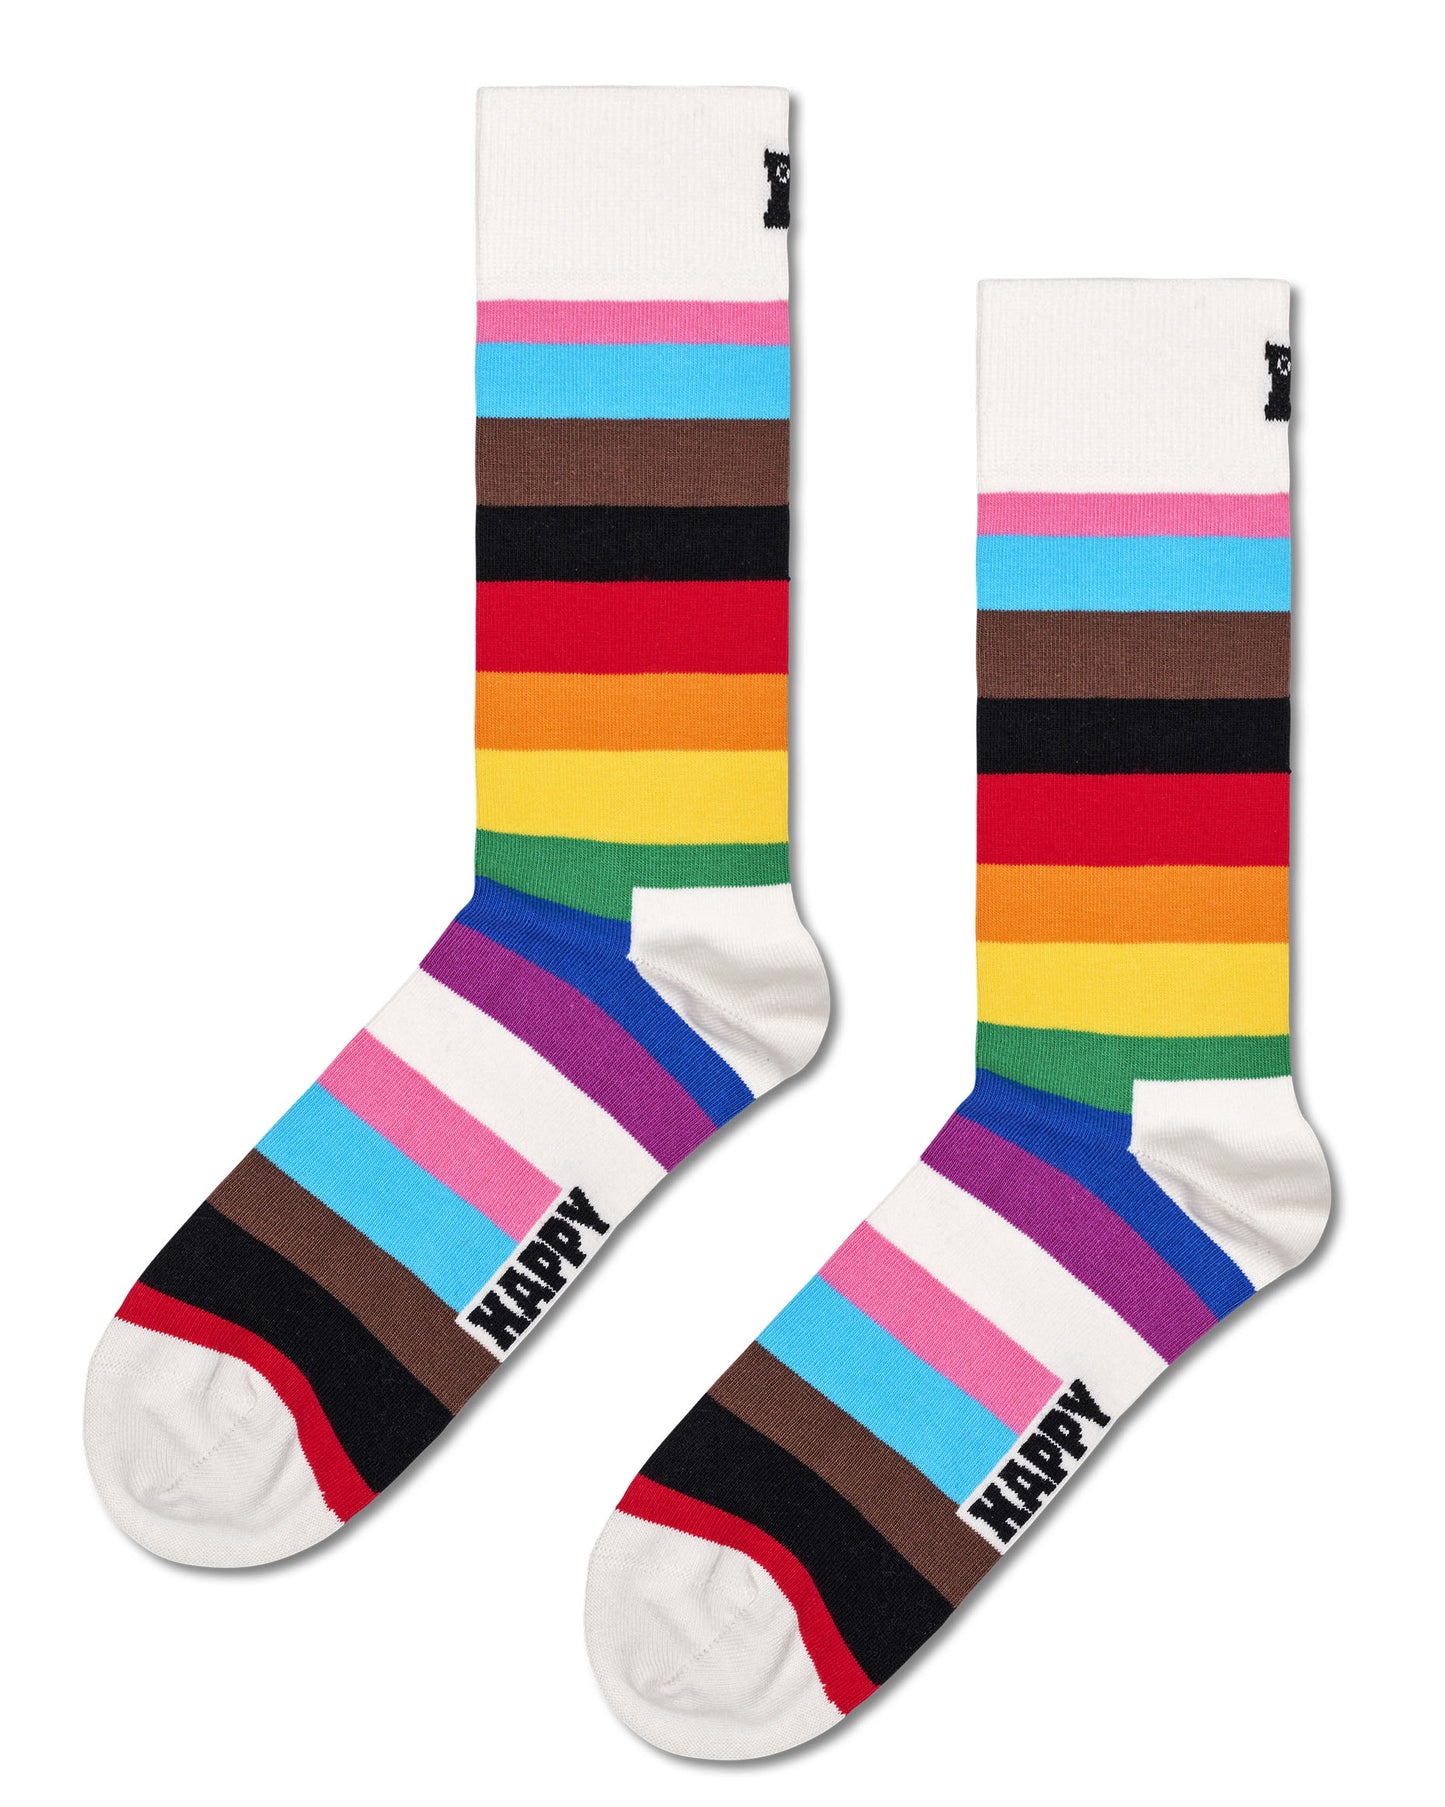 Happy Socks PRS01-0200 Pride Sock - Cream organic cotton crew length ankle socks with a horizontal LGBTQ+ rainbow stripe pattern. Available in men and women's sizes.